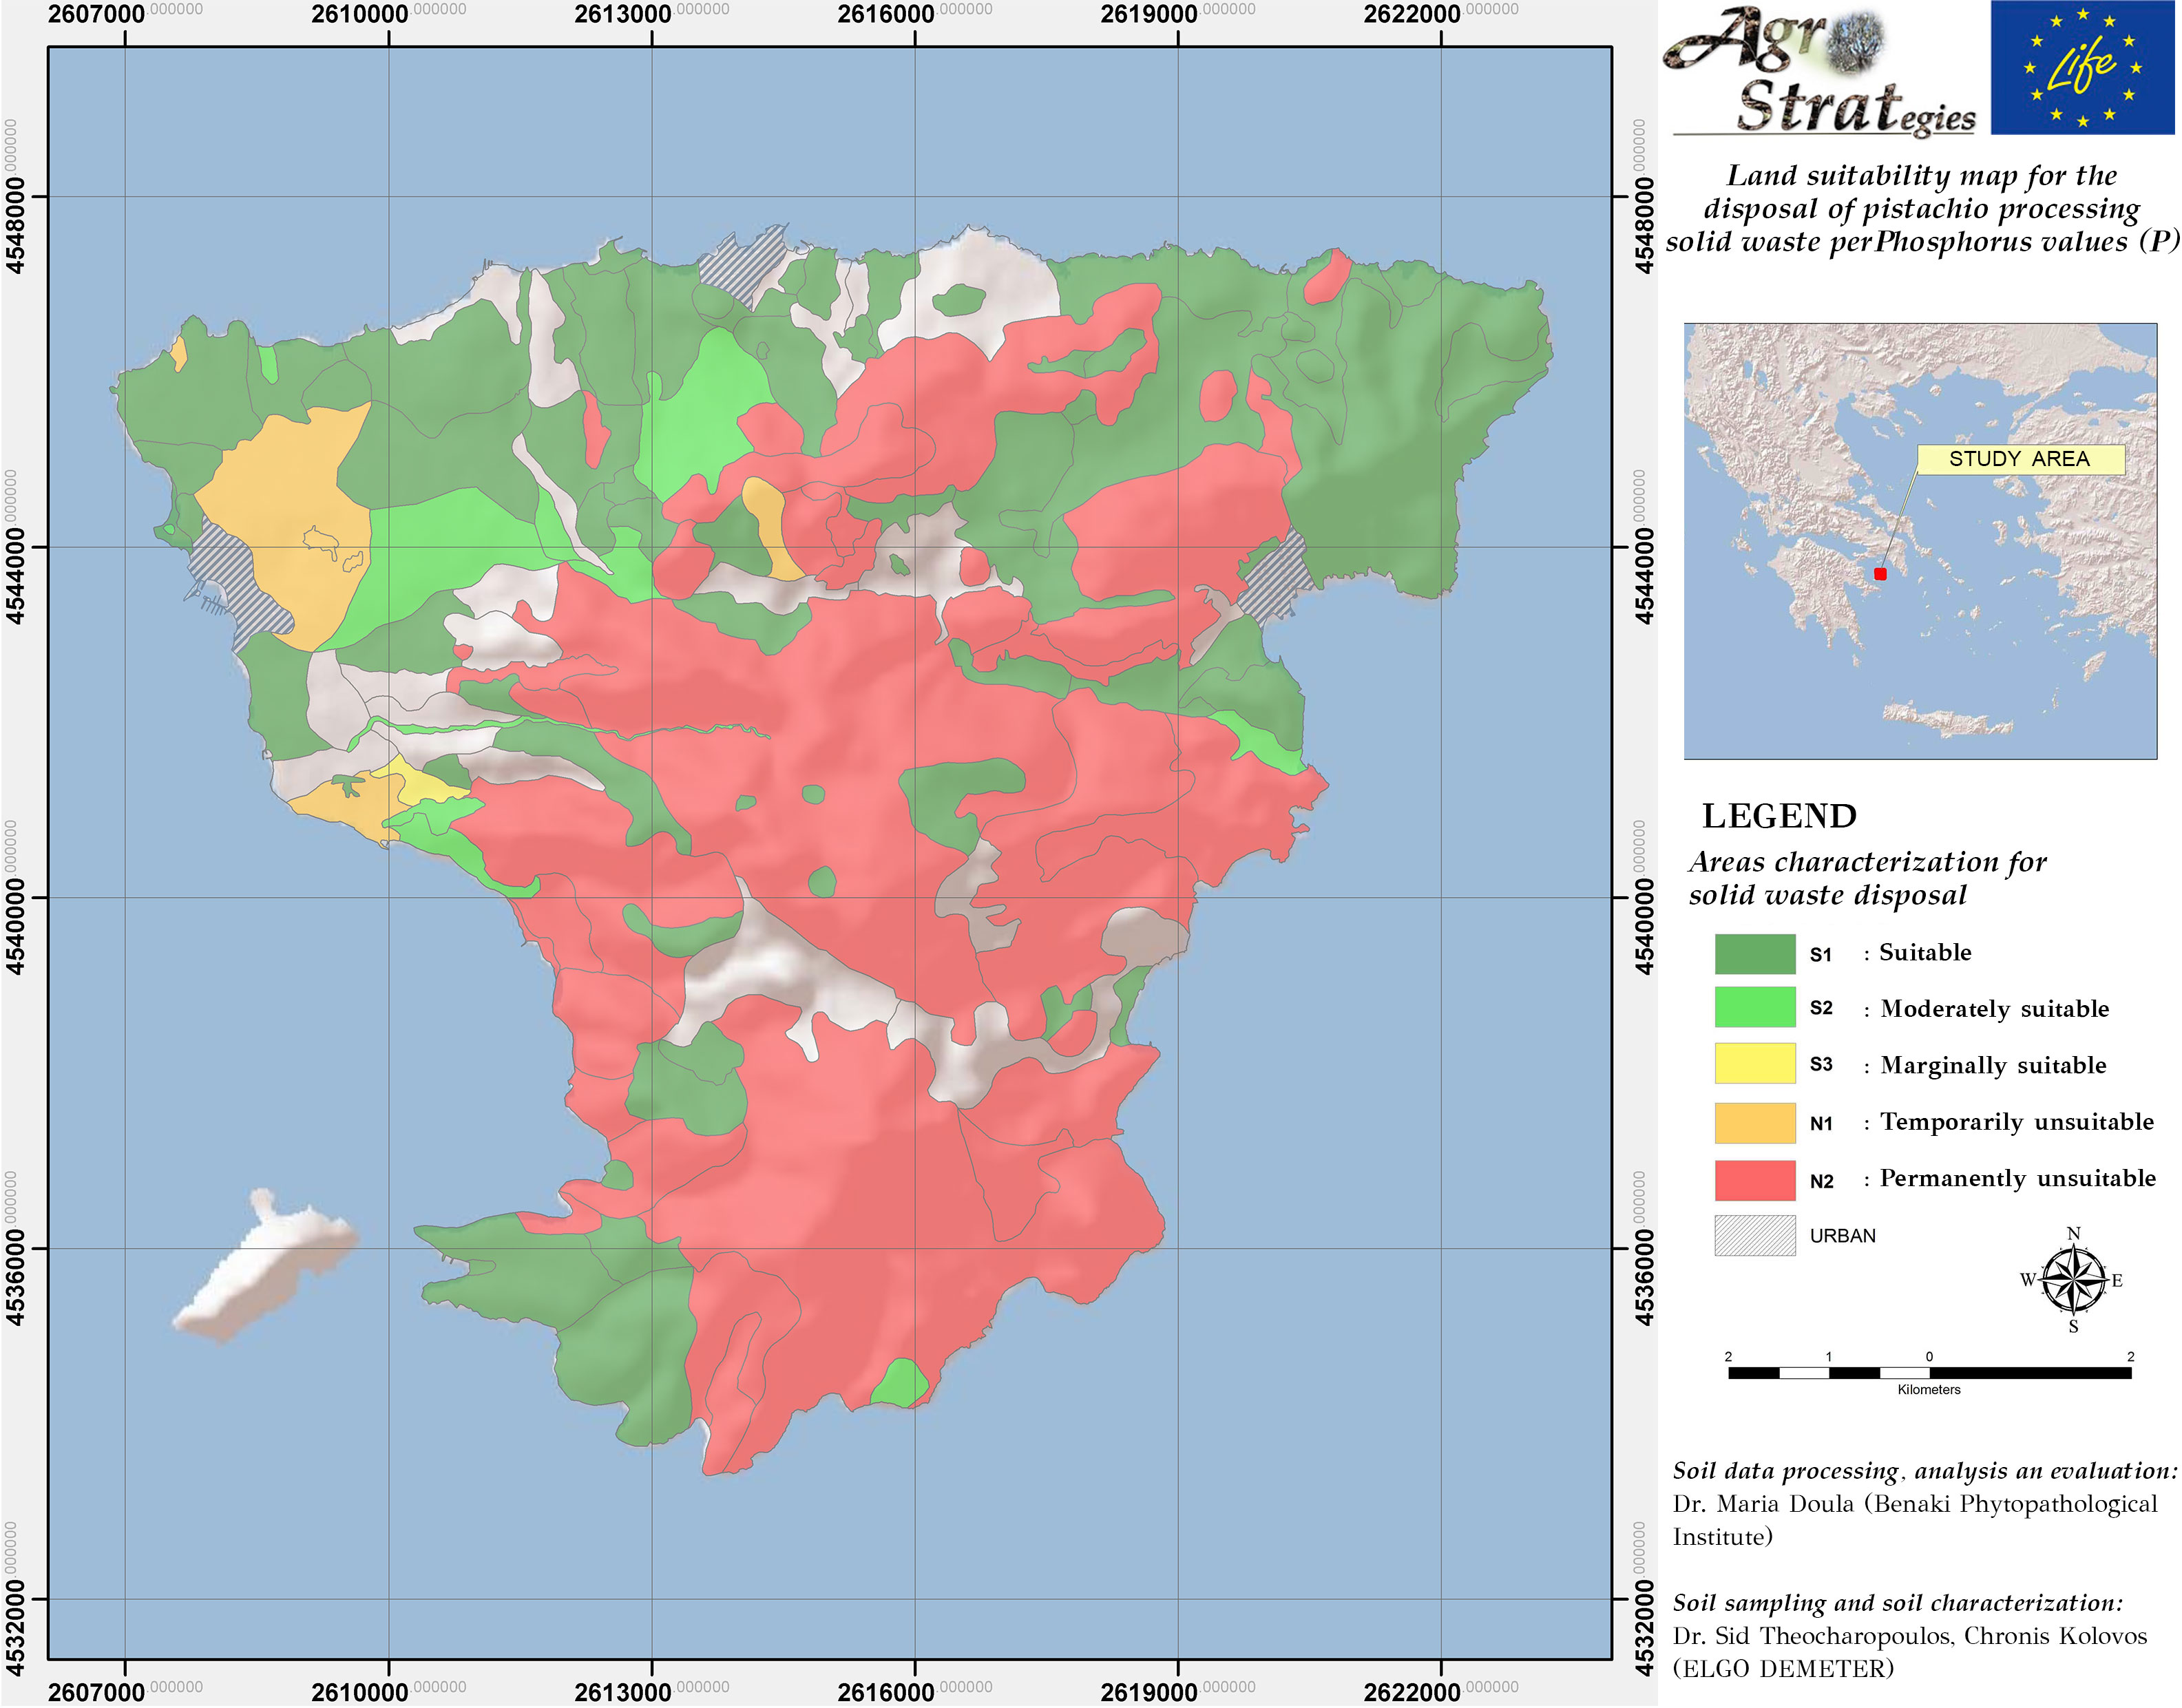 Dr. M.K.Doula.Land Suitability Map of Aegina island, Greece, for the distribution of solid pistachio waste as per soil available Phosphorus content (LIFE-AgroStrat)